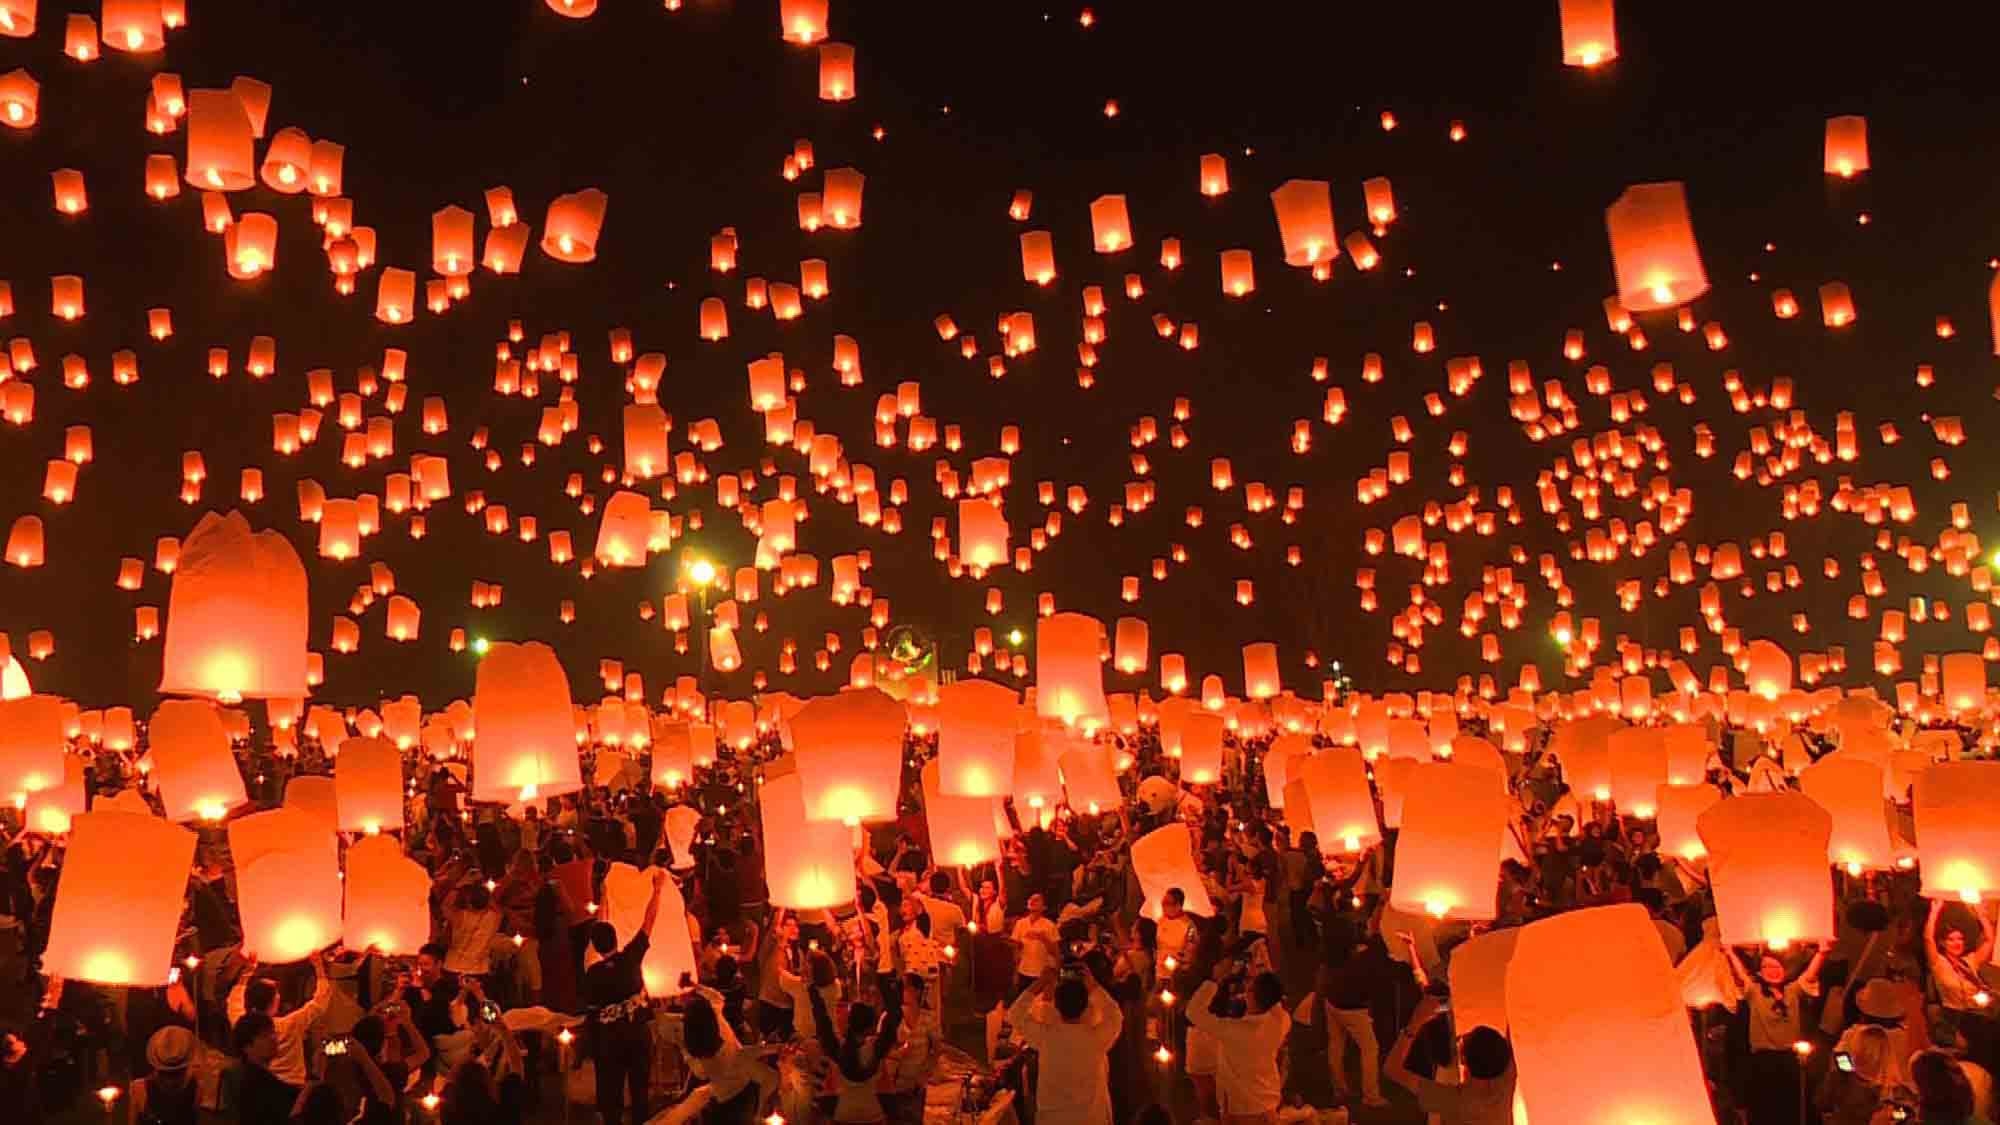 Thousands of paper lanterns lit up the sky over the Thai city of Chiang